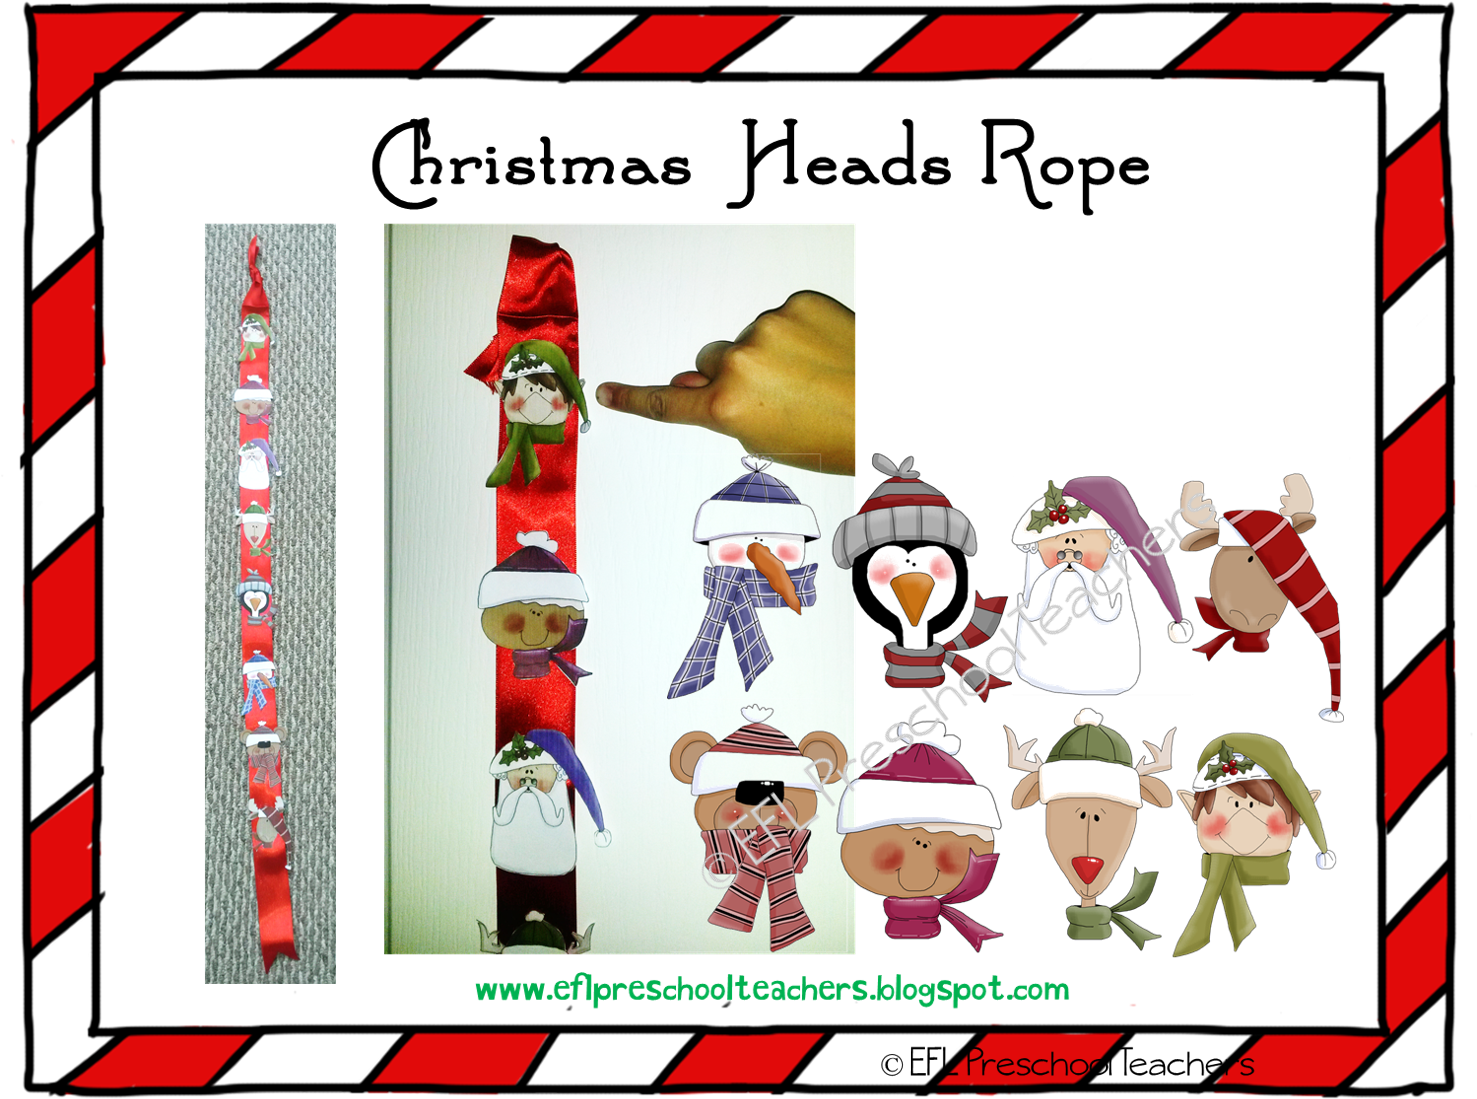 Have Seen And Participated In Photo Booths At Weddings, - Christmas Piano: Christmas Piano Lounge Cd (1478x1125)